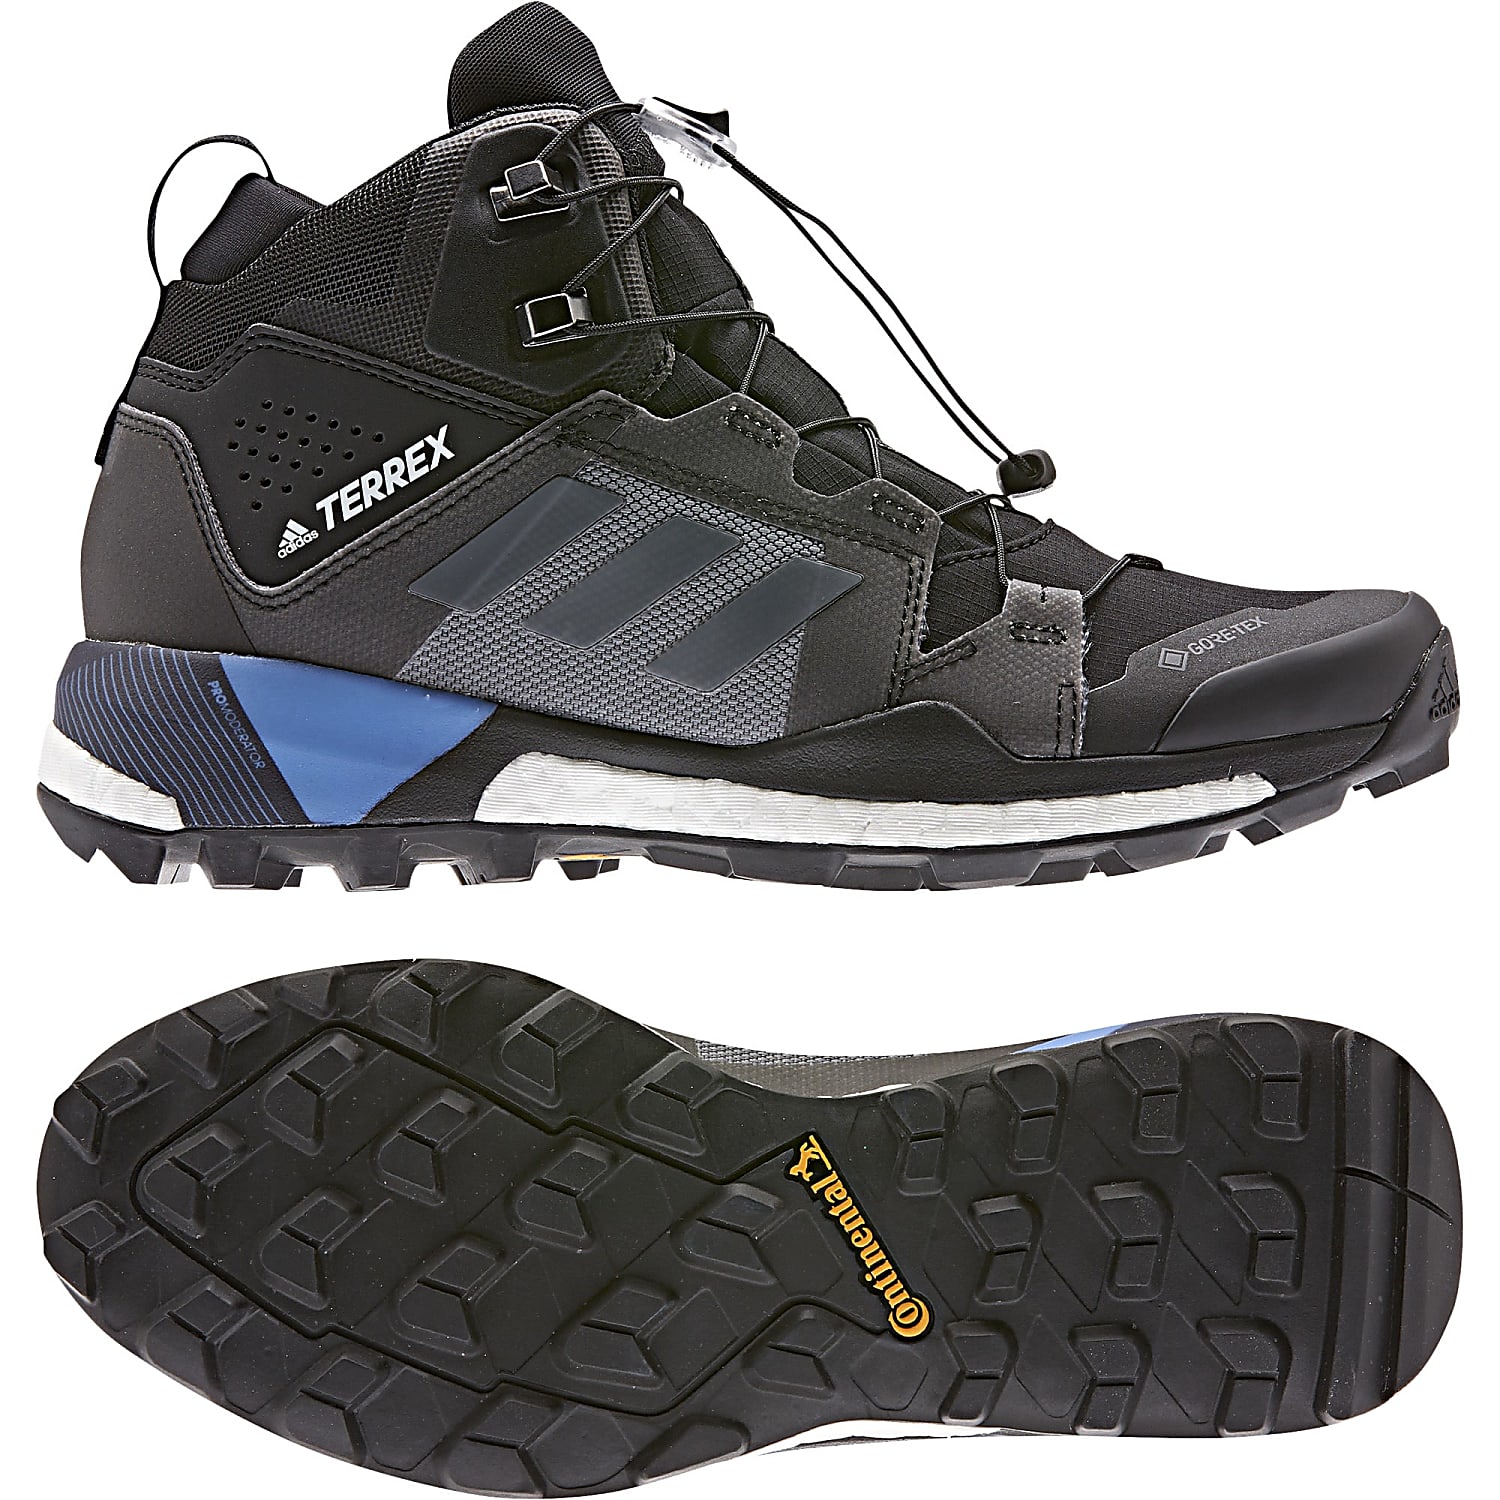 skychaser mid gtx shoes